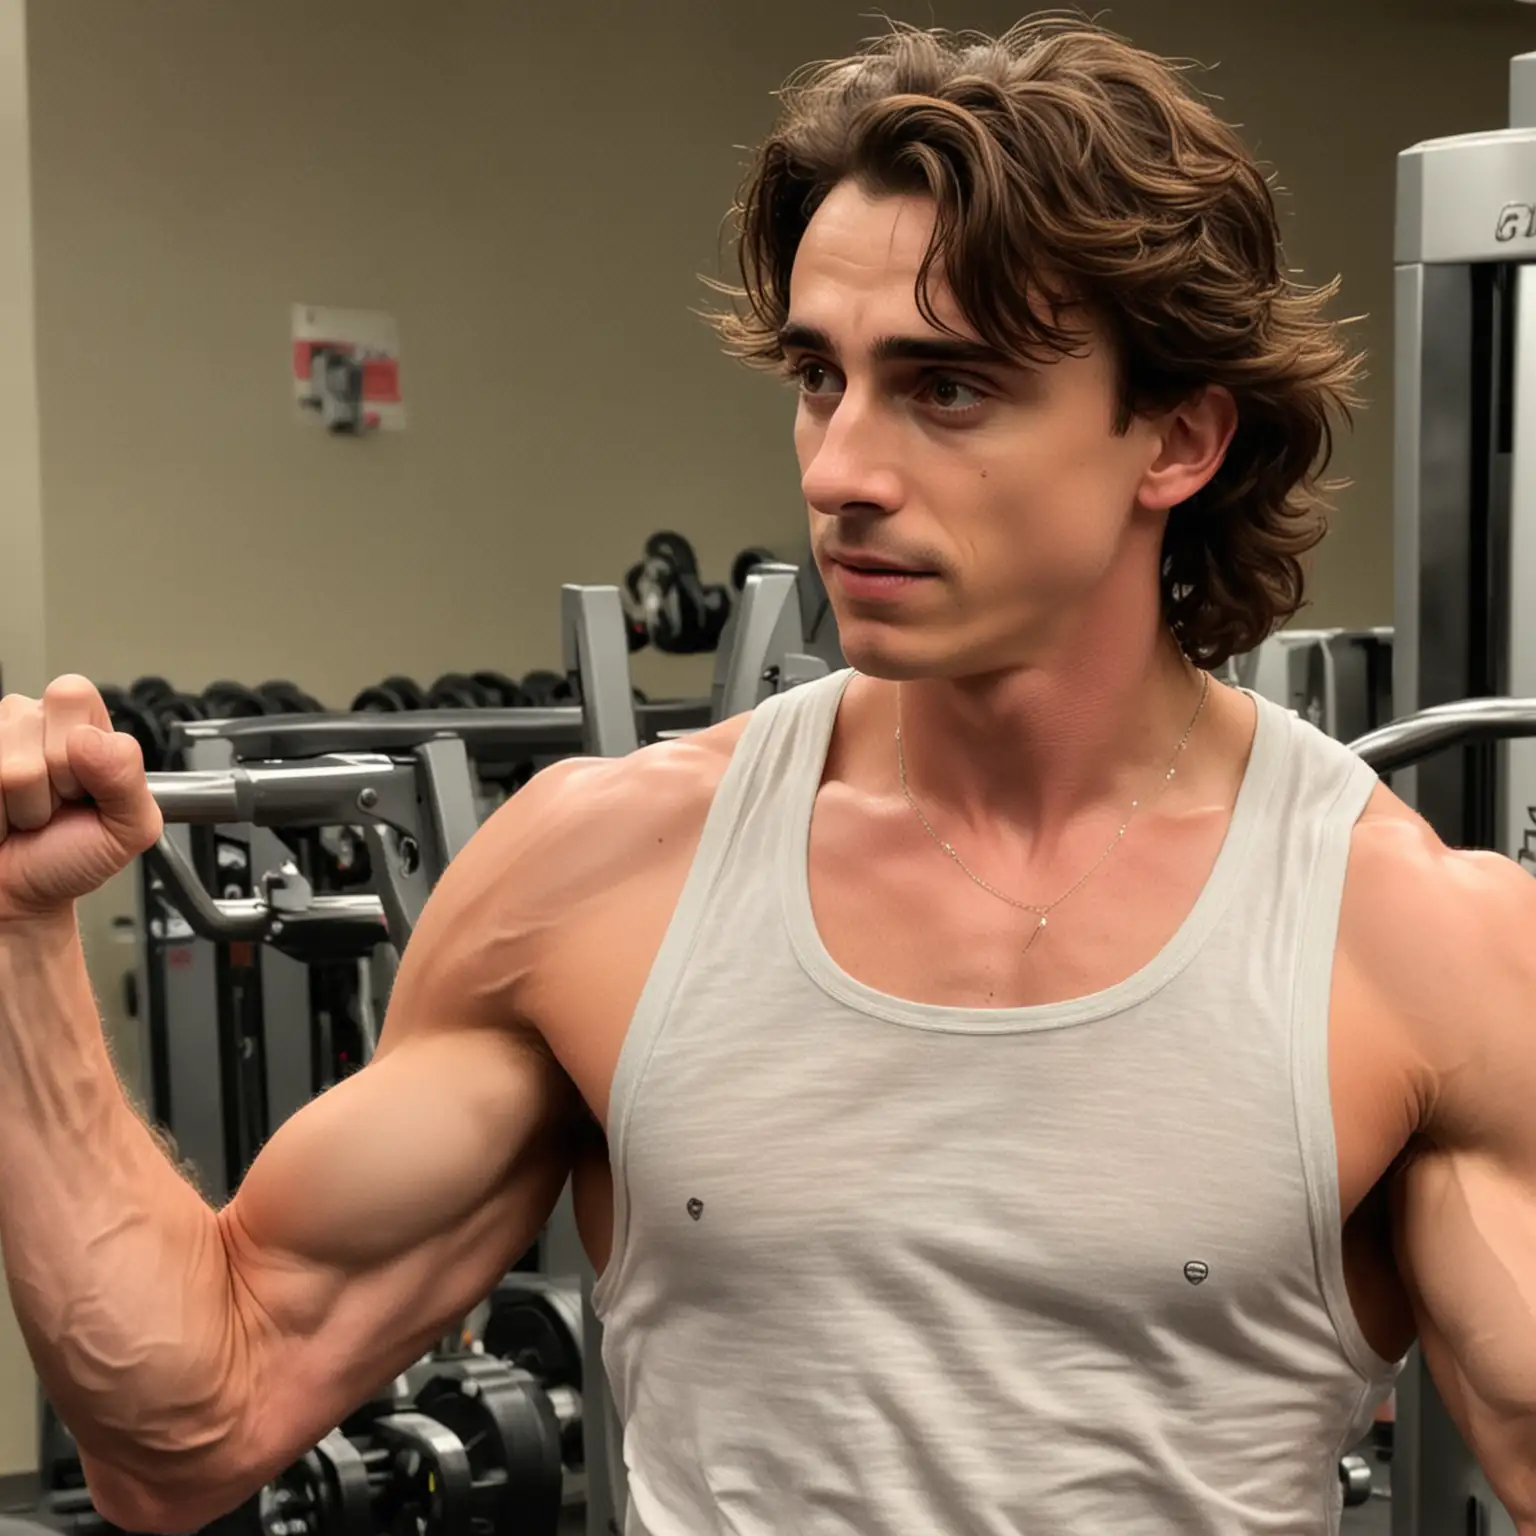 Timothee Chalamet with muscles like Arnold Schwarzenegger in a 24 hour fitness